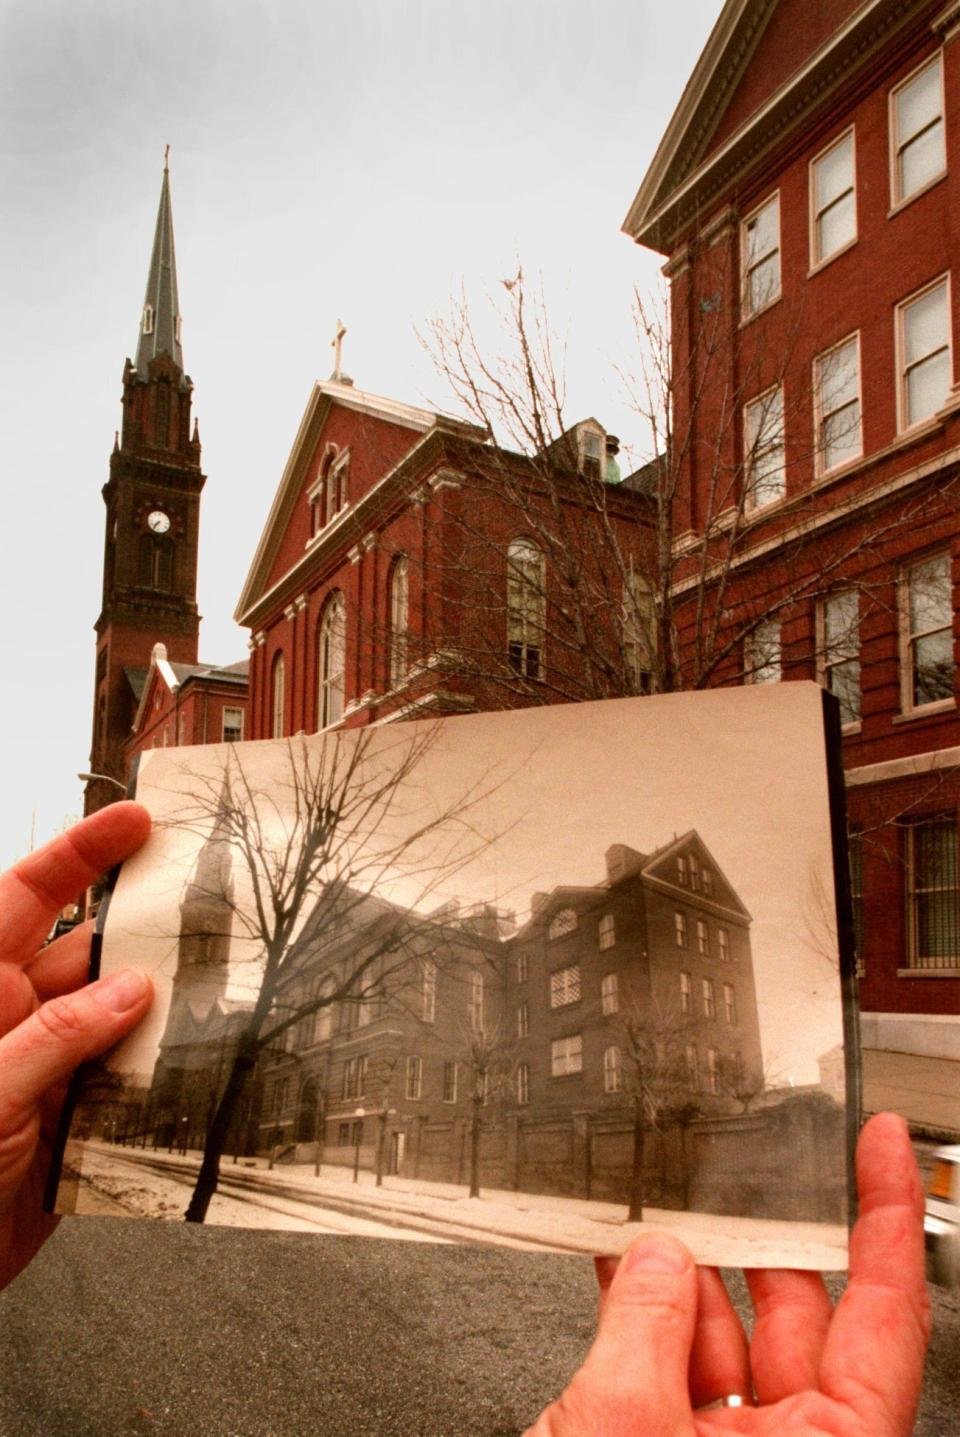 In this Dec. 19, 1996 photo, The Institute of Notre Dame is juxtaposed with a photograph from the early 1900s in Baltimore. Catholic schools have faced tough times for years, but the pace of closures is accelerating dramatically amid economic fallout from the coronavirus pandemic in 2020. The school, founded in 1847, is due to close on June 30, 2020. House Speaker Nancy Pelosi is an alumna. (Larry C. Price/The Baltimore Sun via AP)